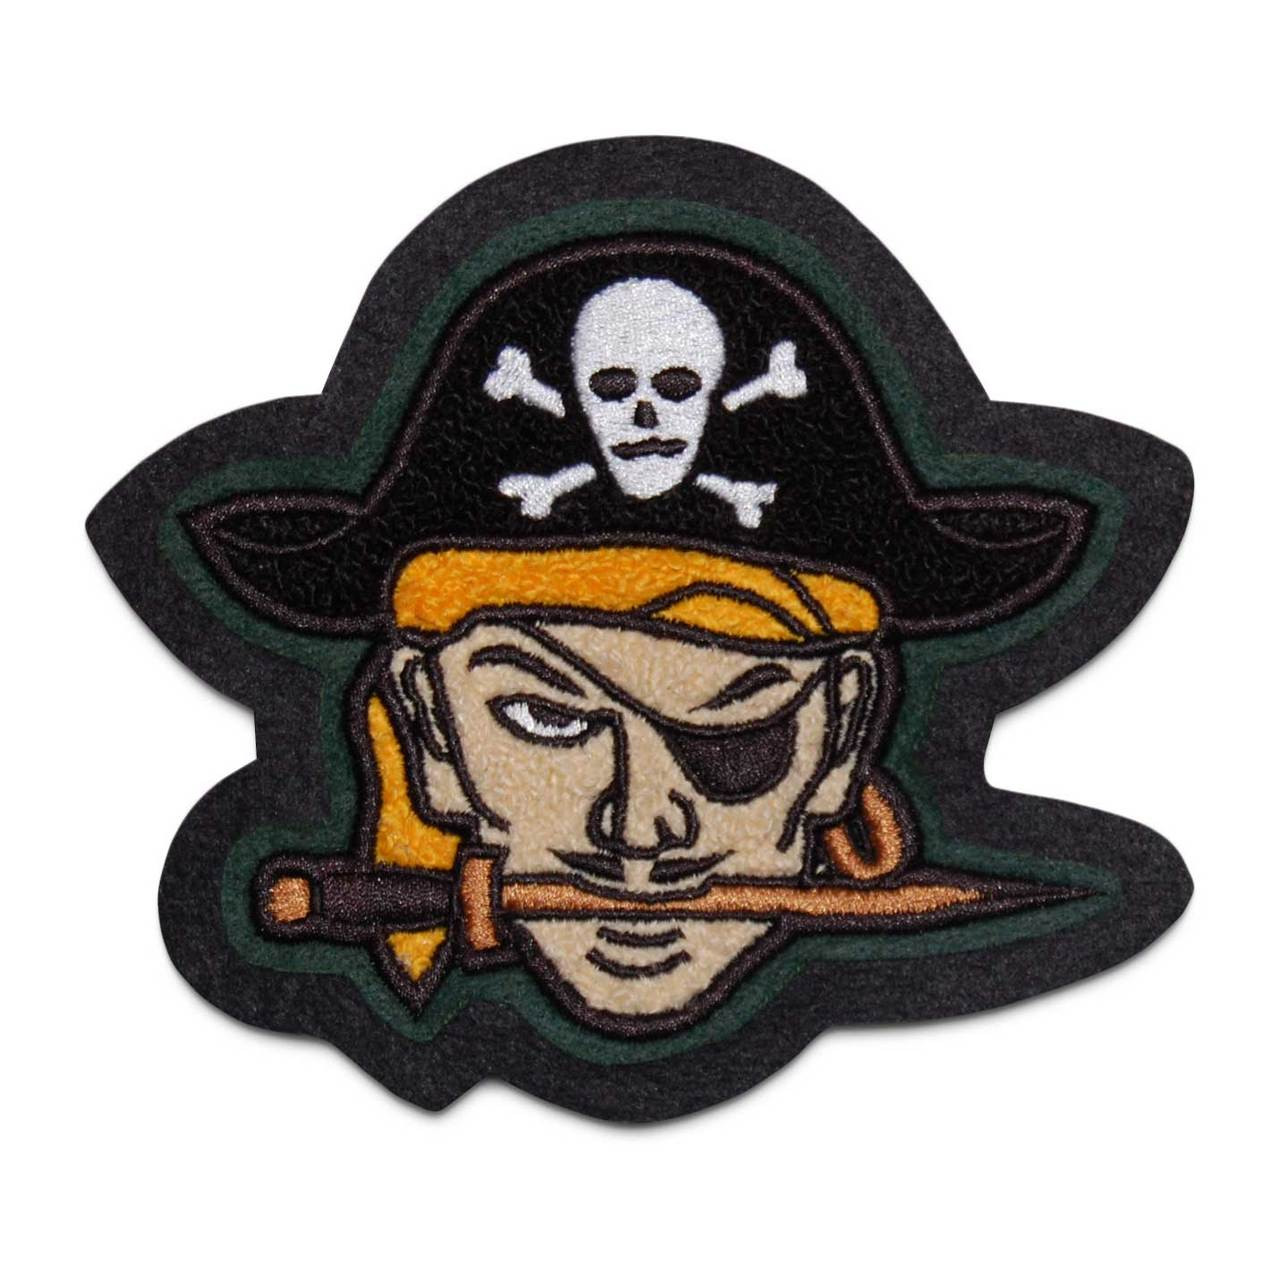 https://cdn2.bigcommerce.com/n-arxsrf/5dqrv2e/products/716/images/1658/pirate_2_chenille_mascot_patch_2__70981.1409096998.1280.1280.jpg?c=2